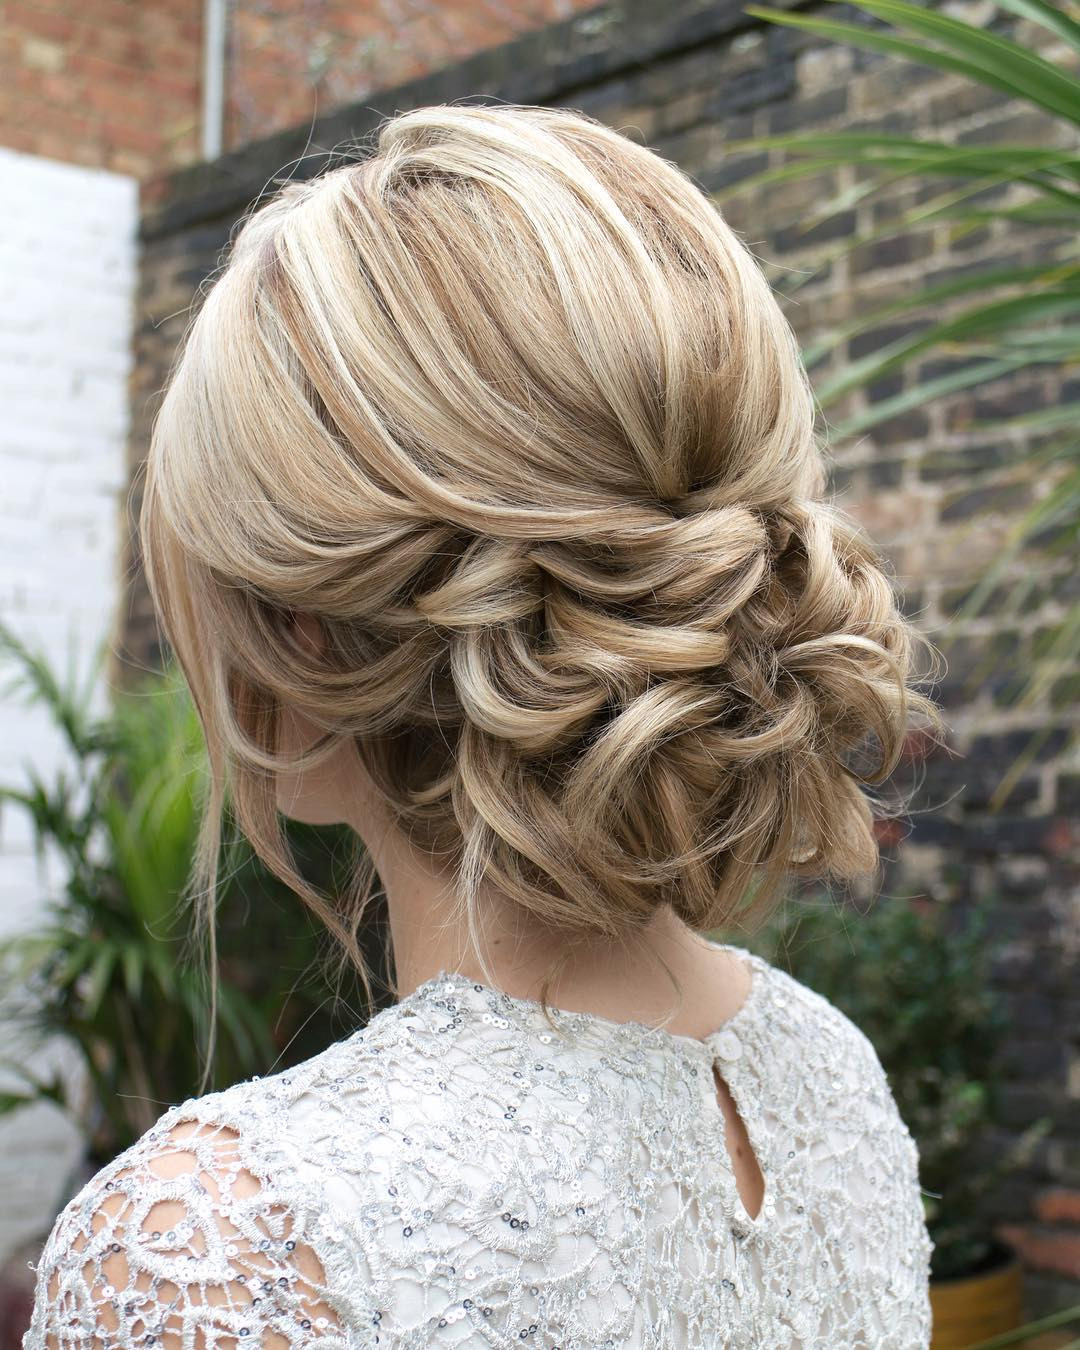 Updo Hairstyles For Prom
 10 Gorgeous Prom Updos for Long Hair Prom Updo Hairstyles